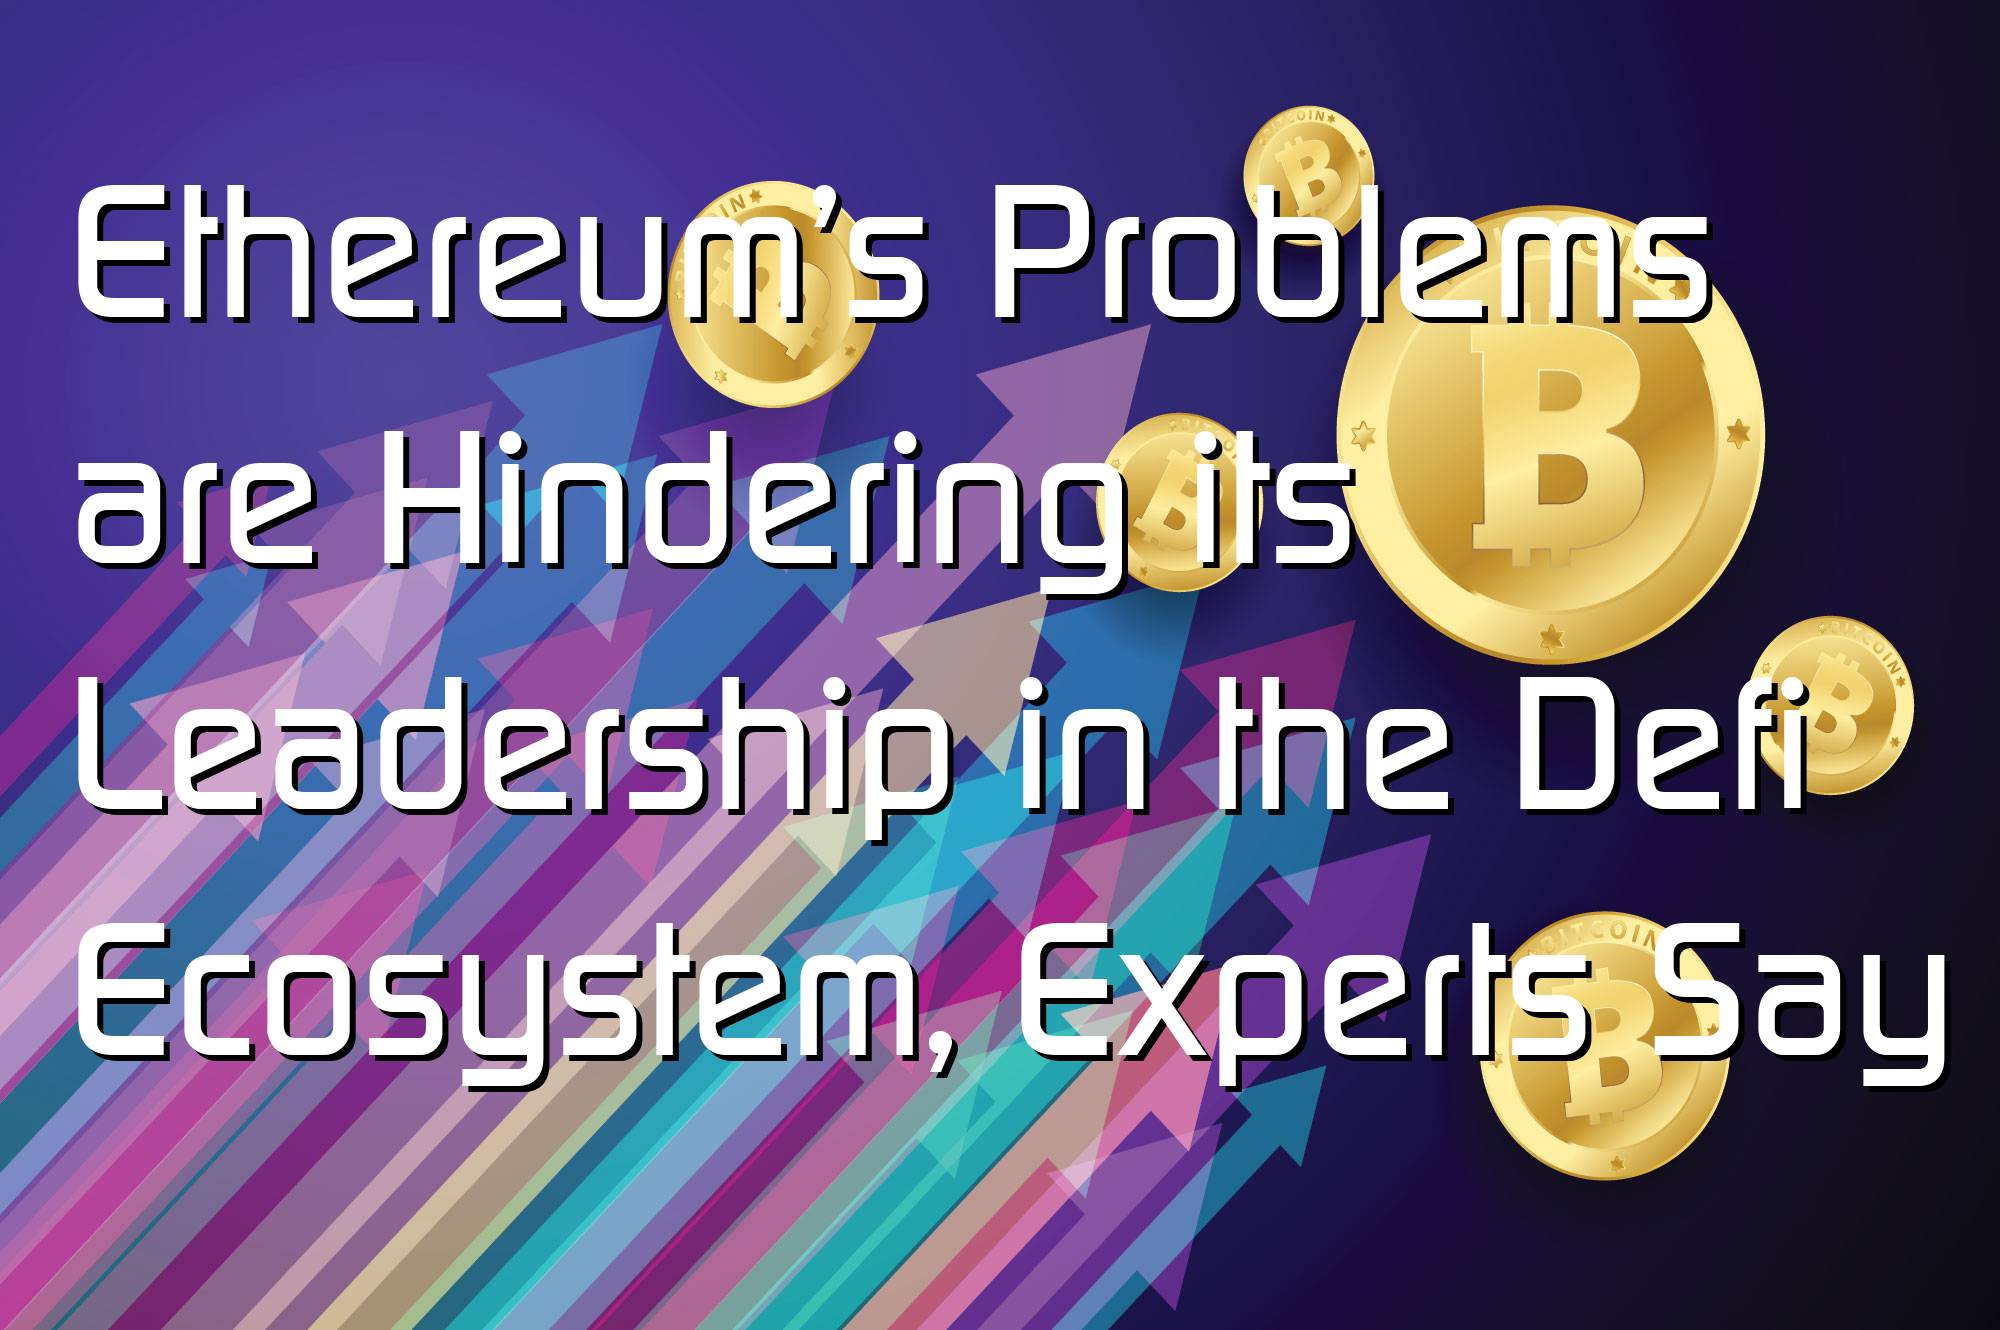 @$57504: Ethereum’s Problems are Hindering its Leadership in the Defi Ecosystem, Experts Say